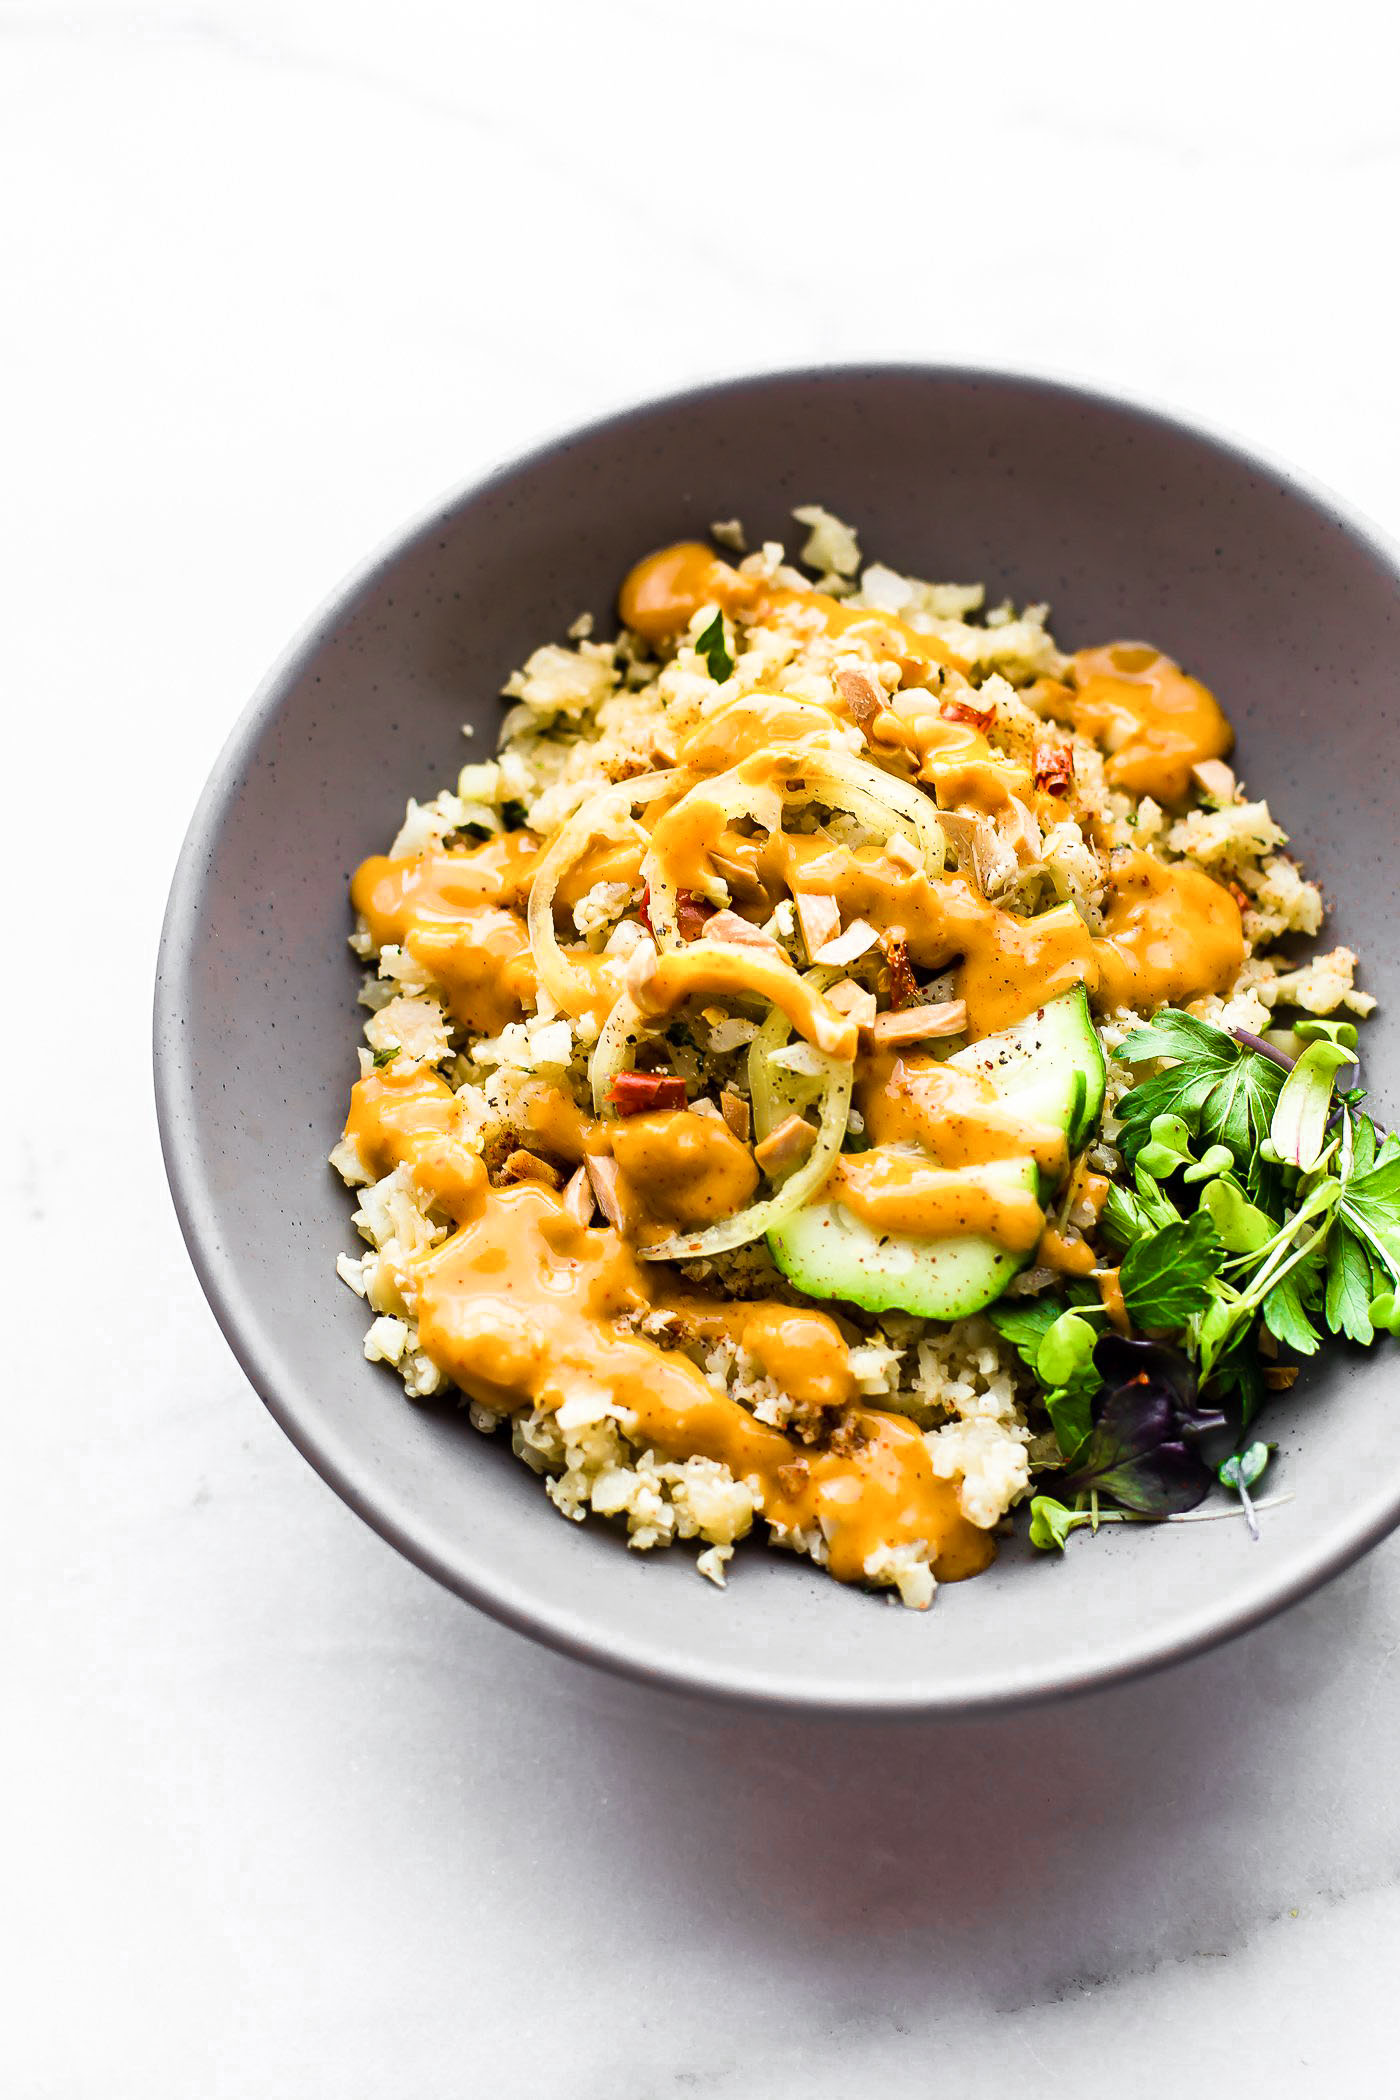 Chili garlic cauliflower risotto served in bowl with cucumber and orange sauce.